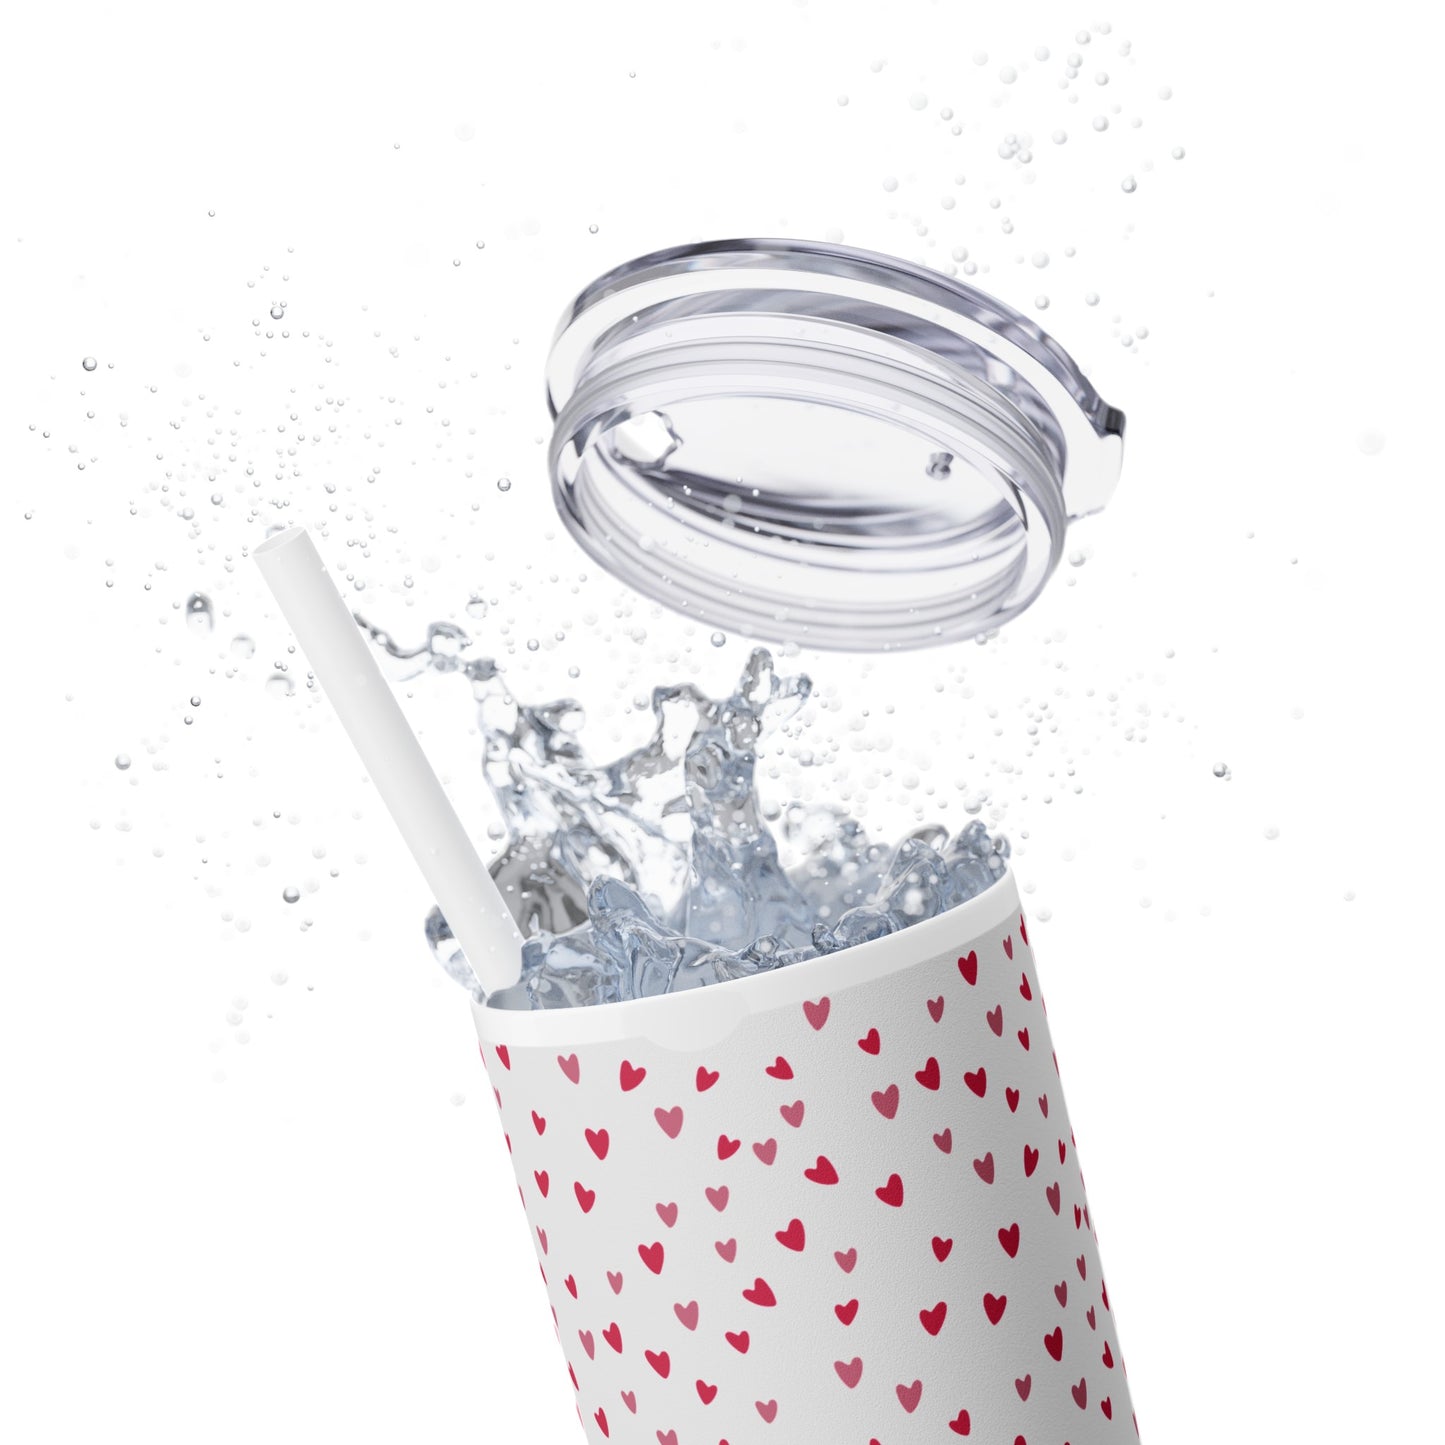 Field of Hearts - 20 oz Tumbler - Maars Maker: Stylish Stainless Steel, 24-Hour Cold, 12-Hour Hot